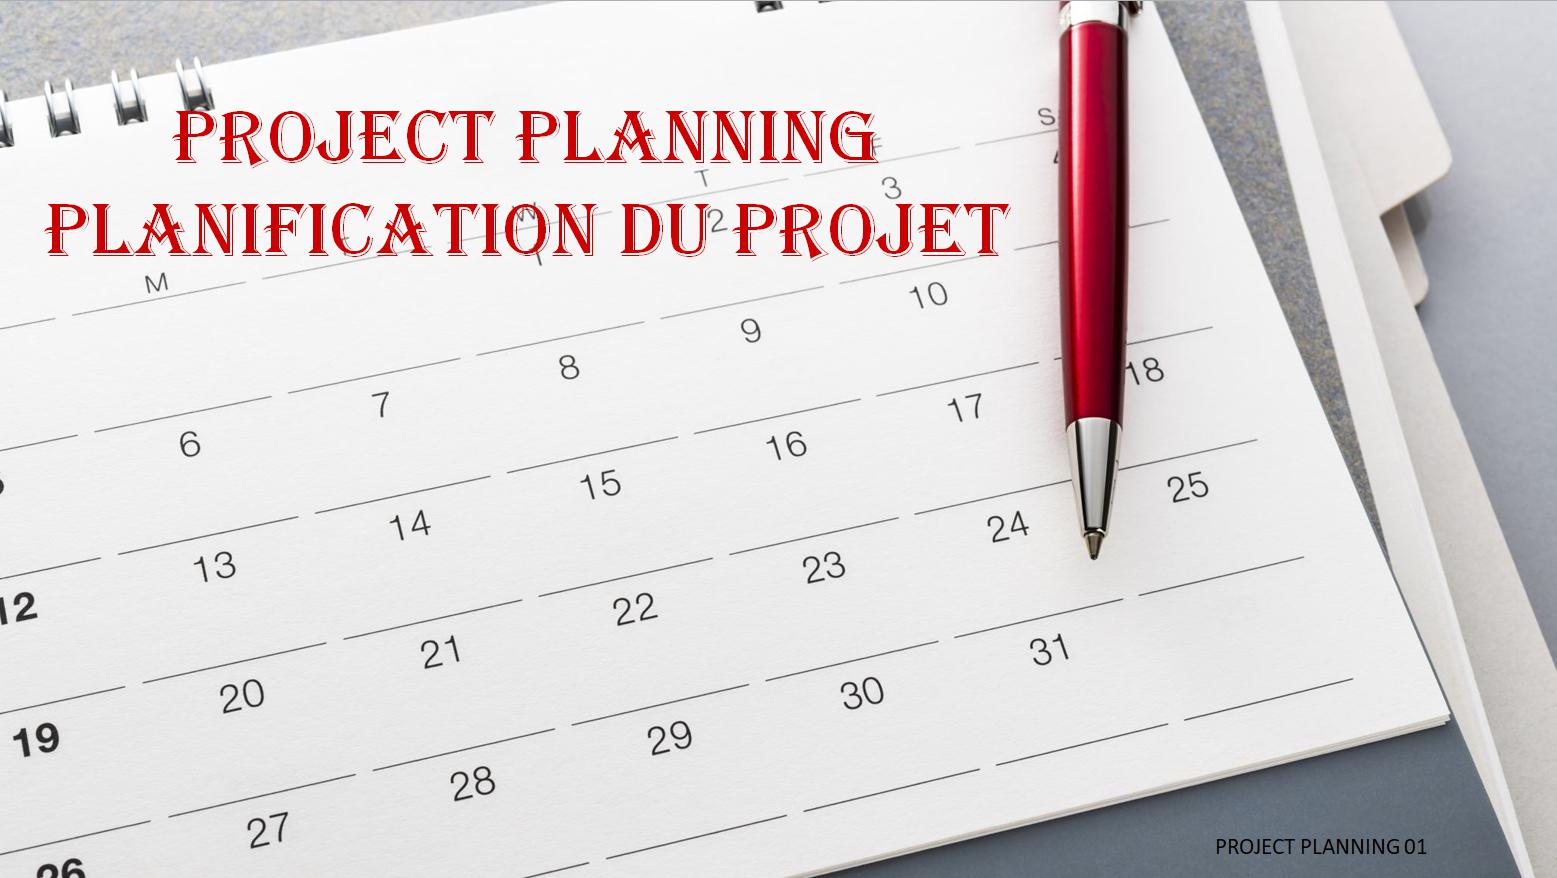 Project planning 01